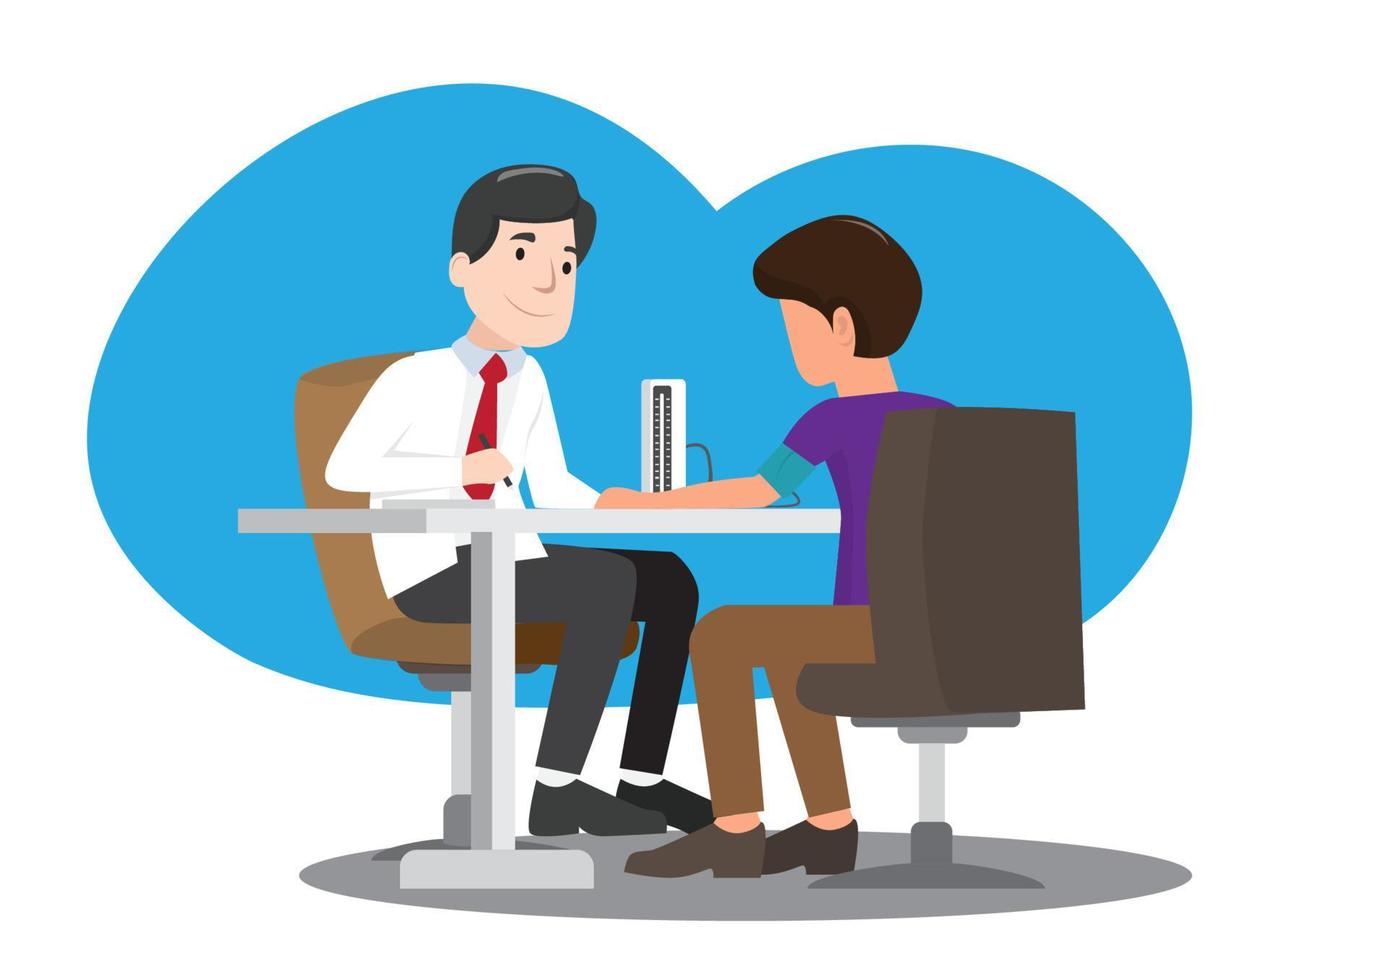 a patient in a doctor's office A patient measures his blood pressure while a doctor is diagnosing diseases and conditions. flat vector cartoon illustration